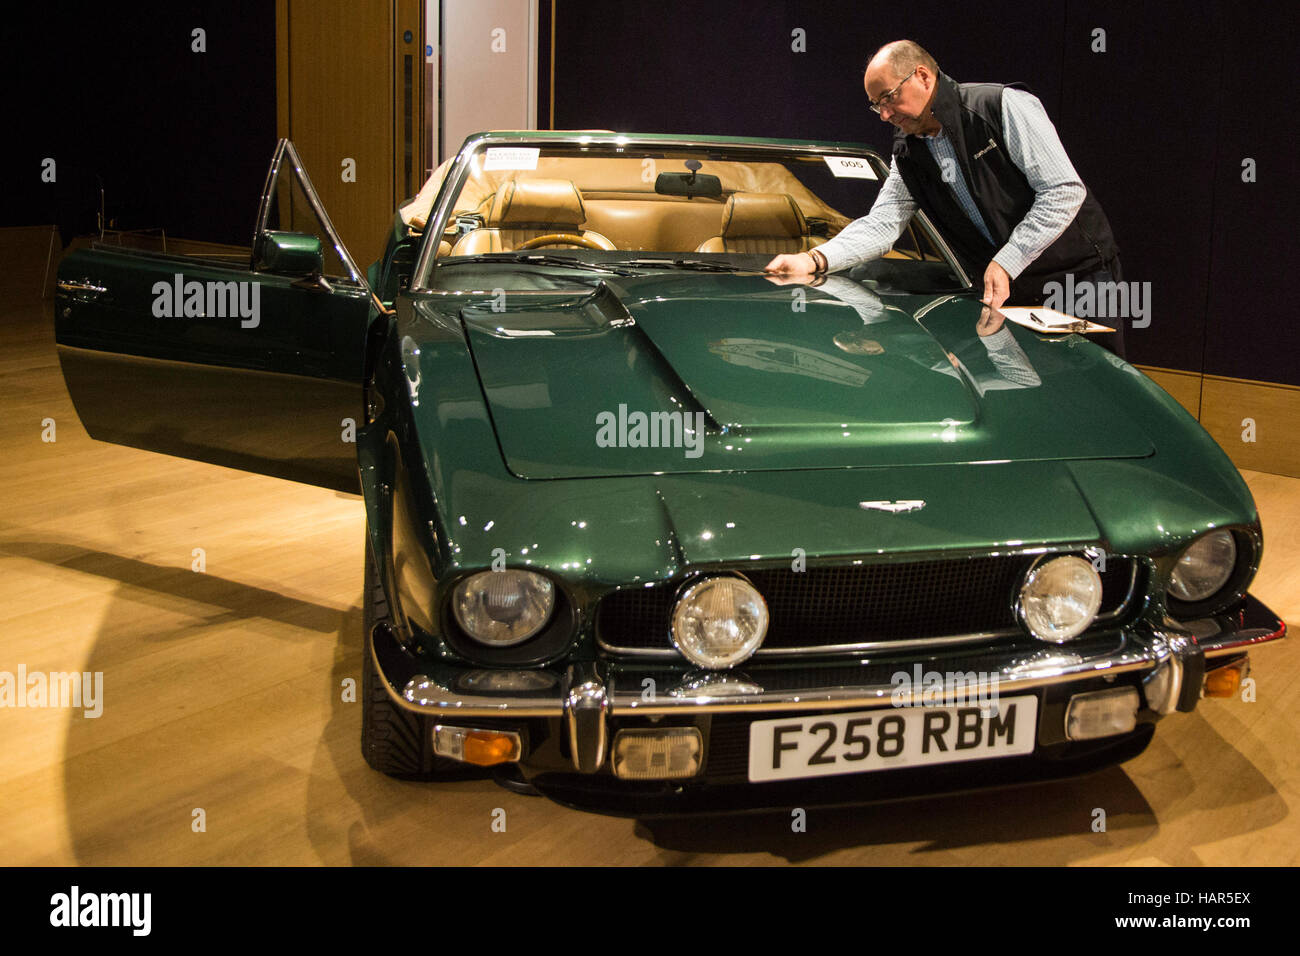 London, UK. 2 December 2016. 1988 Aston Martin V8 Vantage Volante 'Prince of Wales', 7.0 Litre. Est. GBP 600,000-700,000. Bonhams' preview of vintage and classic motor cars for their forthcoming Bond Street Sale on Sunday, 4 December 2016. Stock Photo